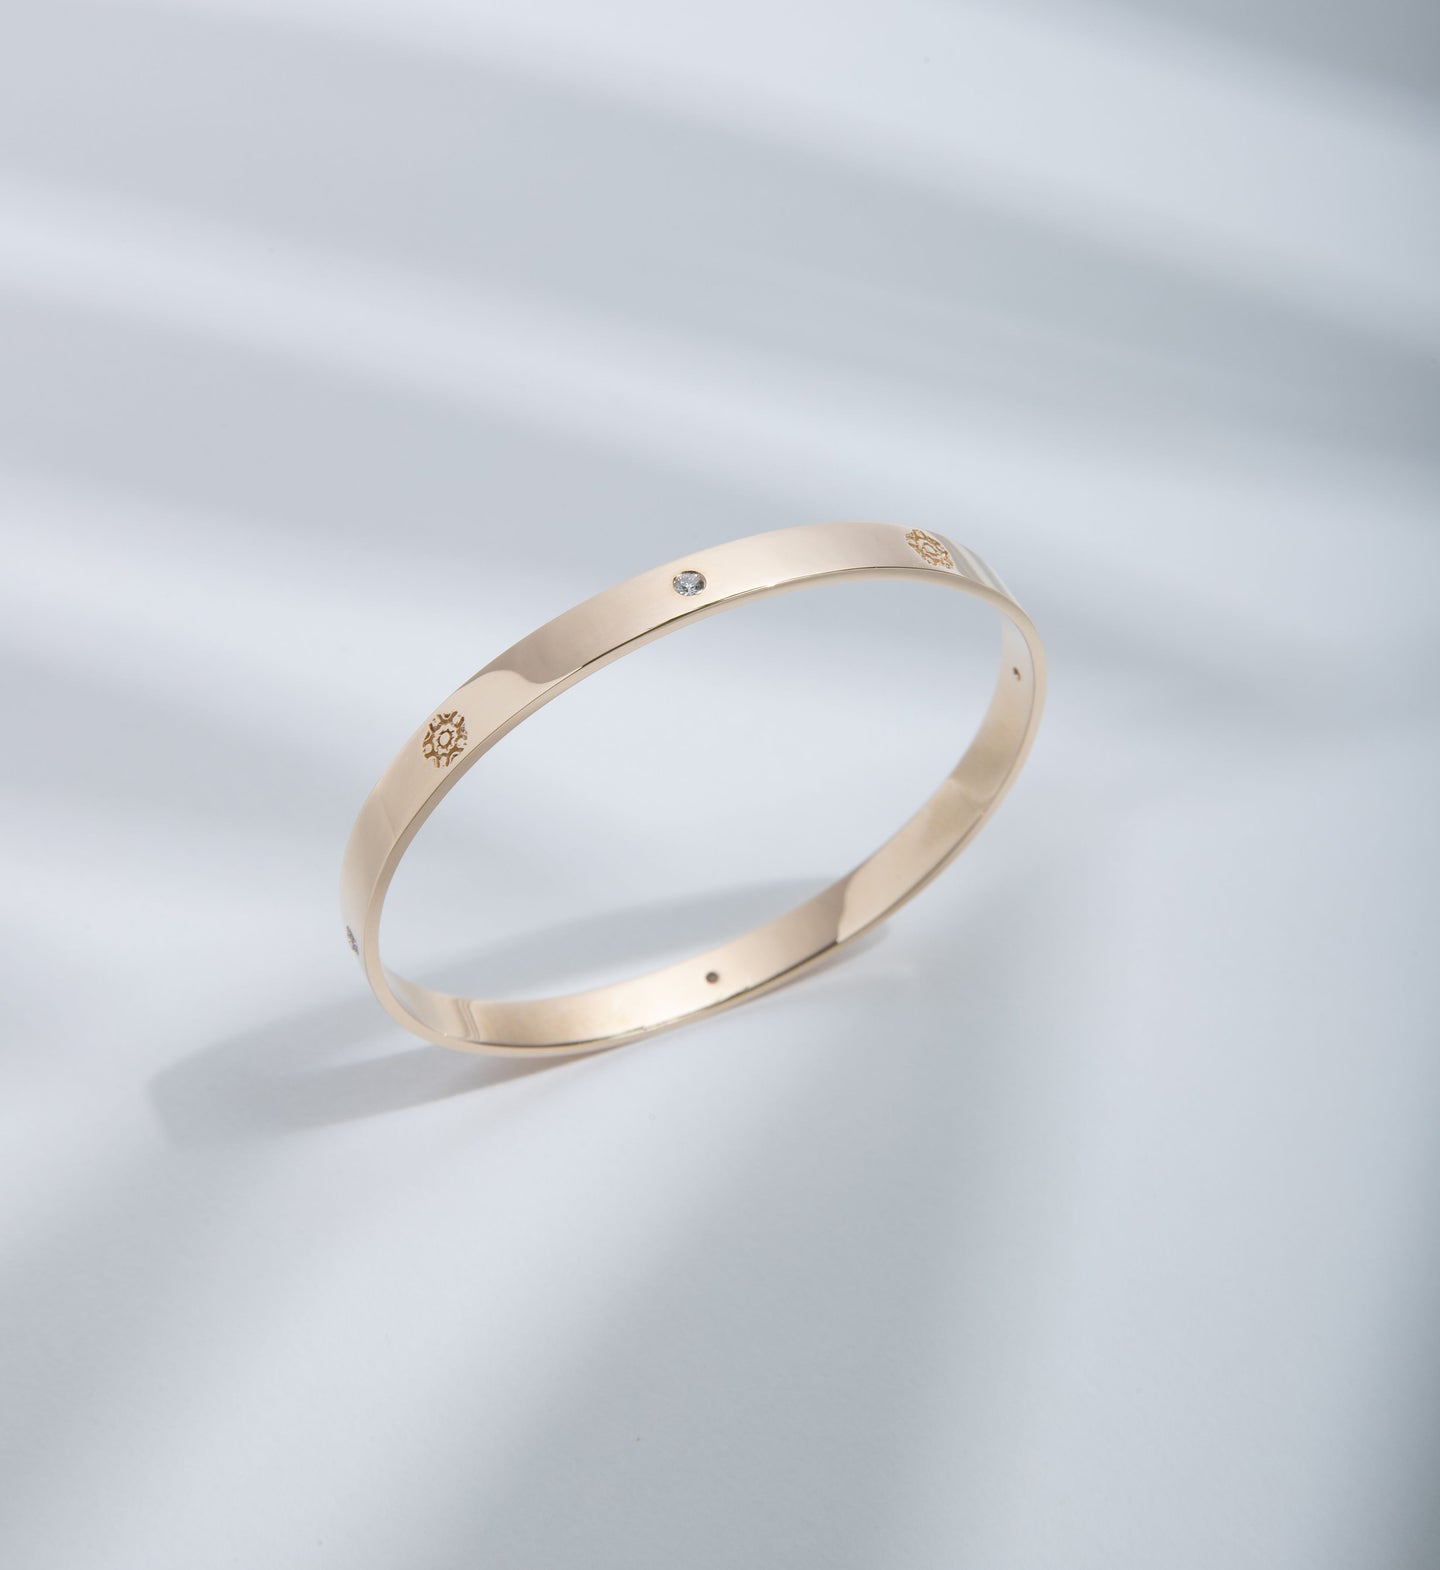 Hie Signature bangle bracelet in gold with logo engraving and diamond details, standing upright